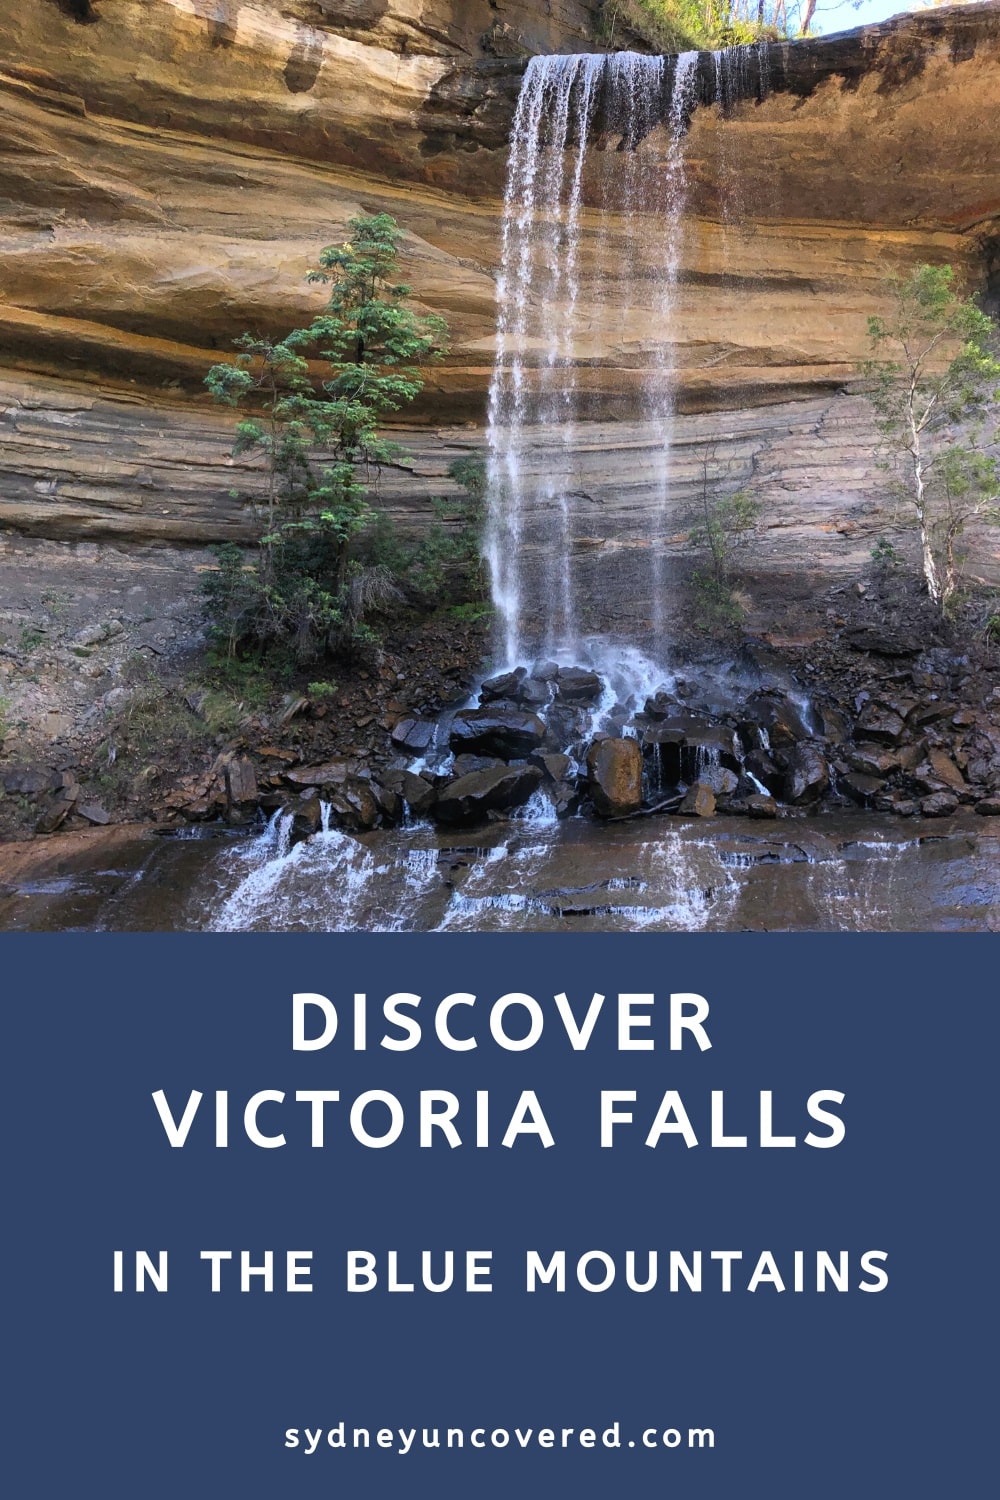 Discover Victoria Falls in the Blue Mountains